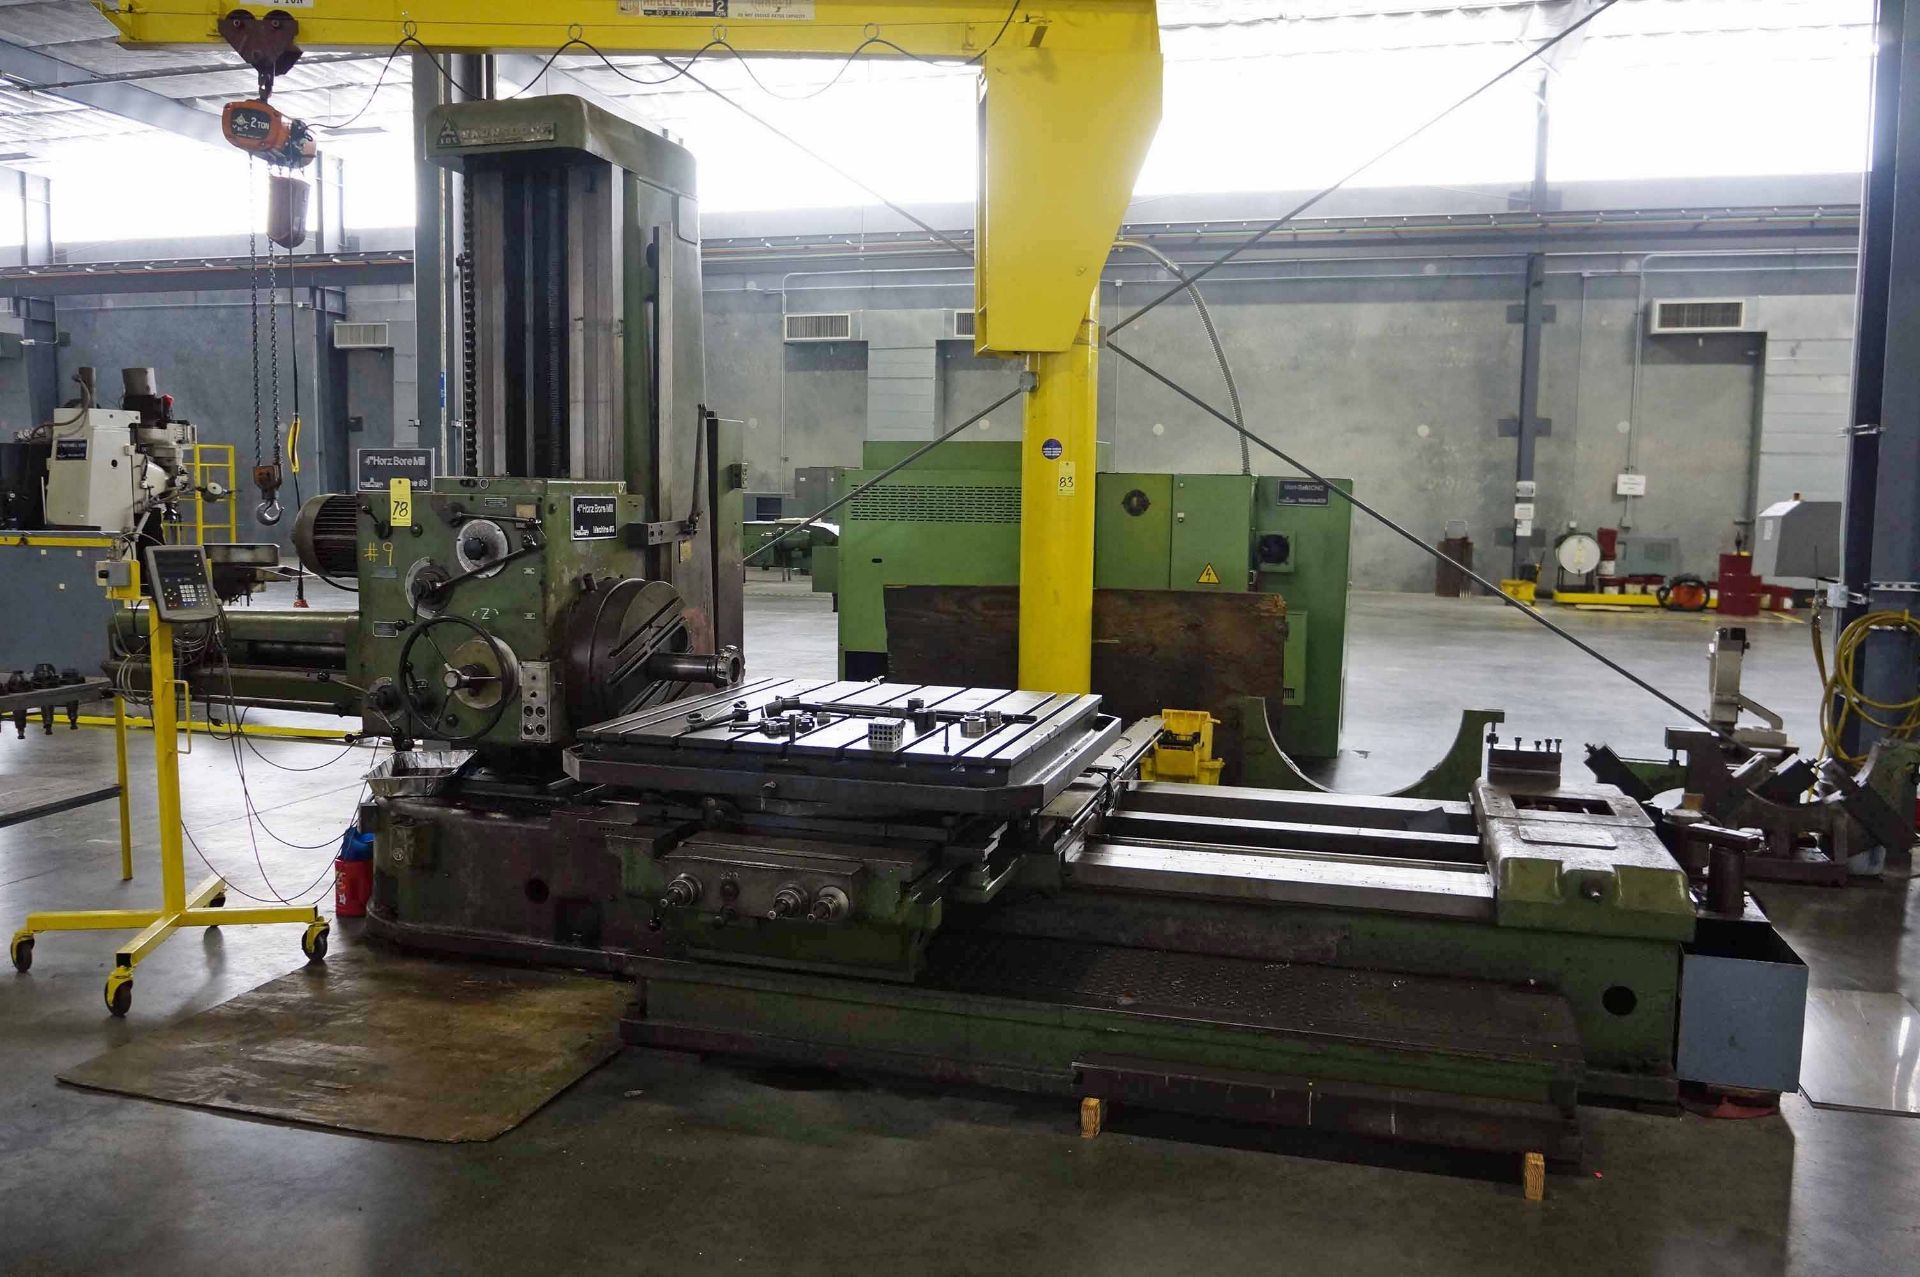 HORIZONTAL BORING MILL, TOS 4" MDL. W100, 39" X-axis travel, 48" Y-axis travel, 60" Z-axis travel,